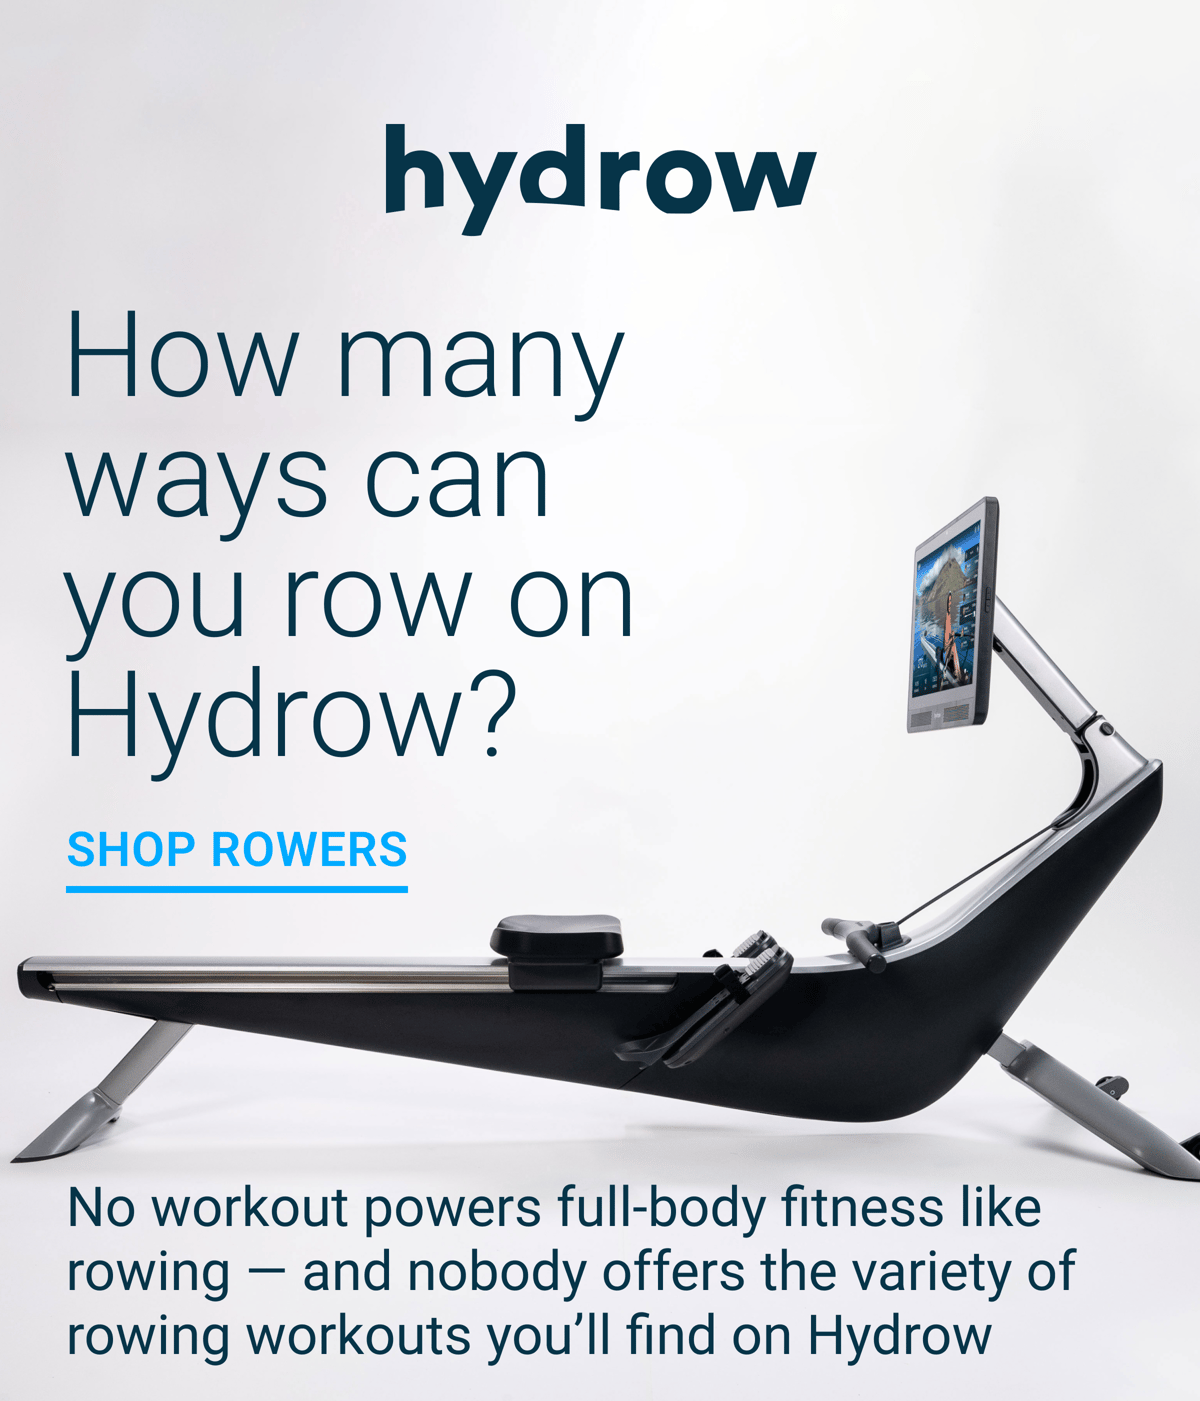 Hydrow How many ways can you row on Hydrow? Shop Rowers. No workout powers full-body fitness like rowing - and nobody offers the variety of rowing workouts you'll find on Hydrow.